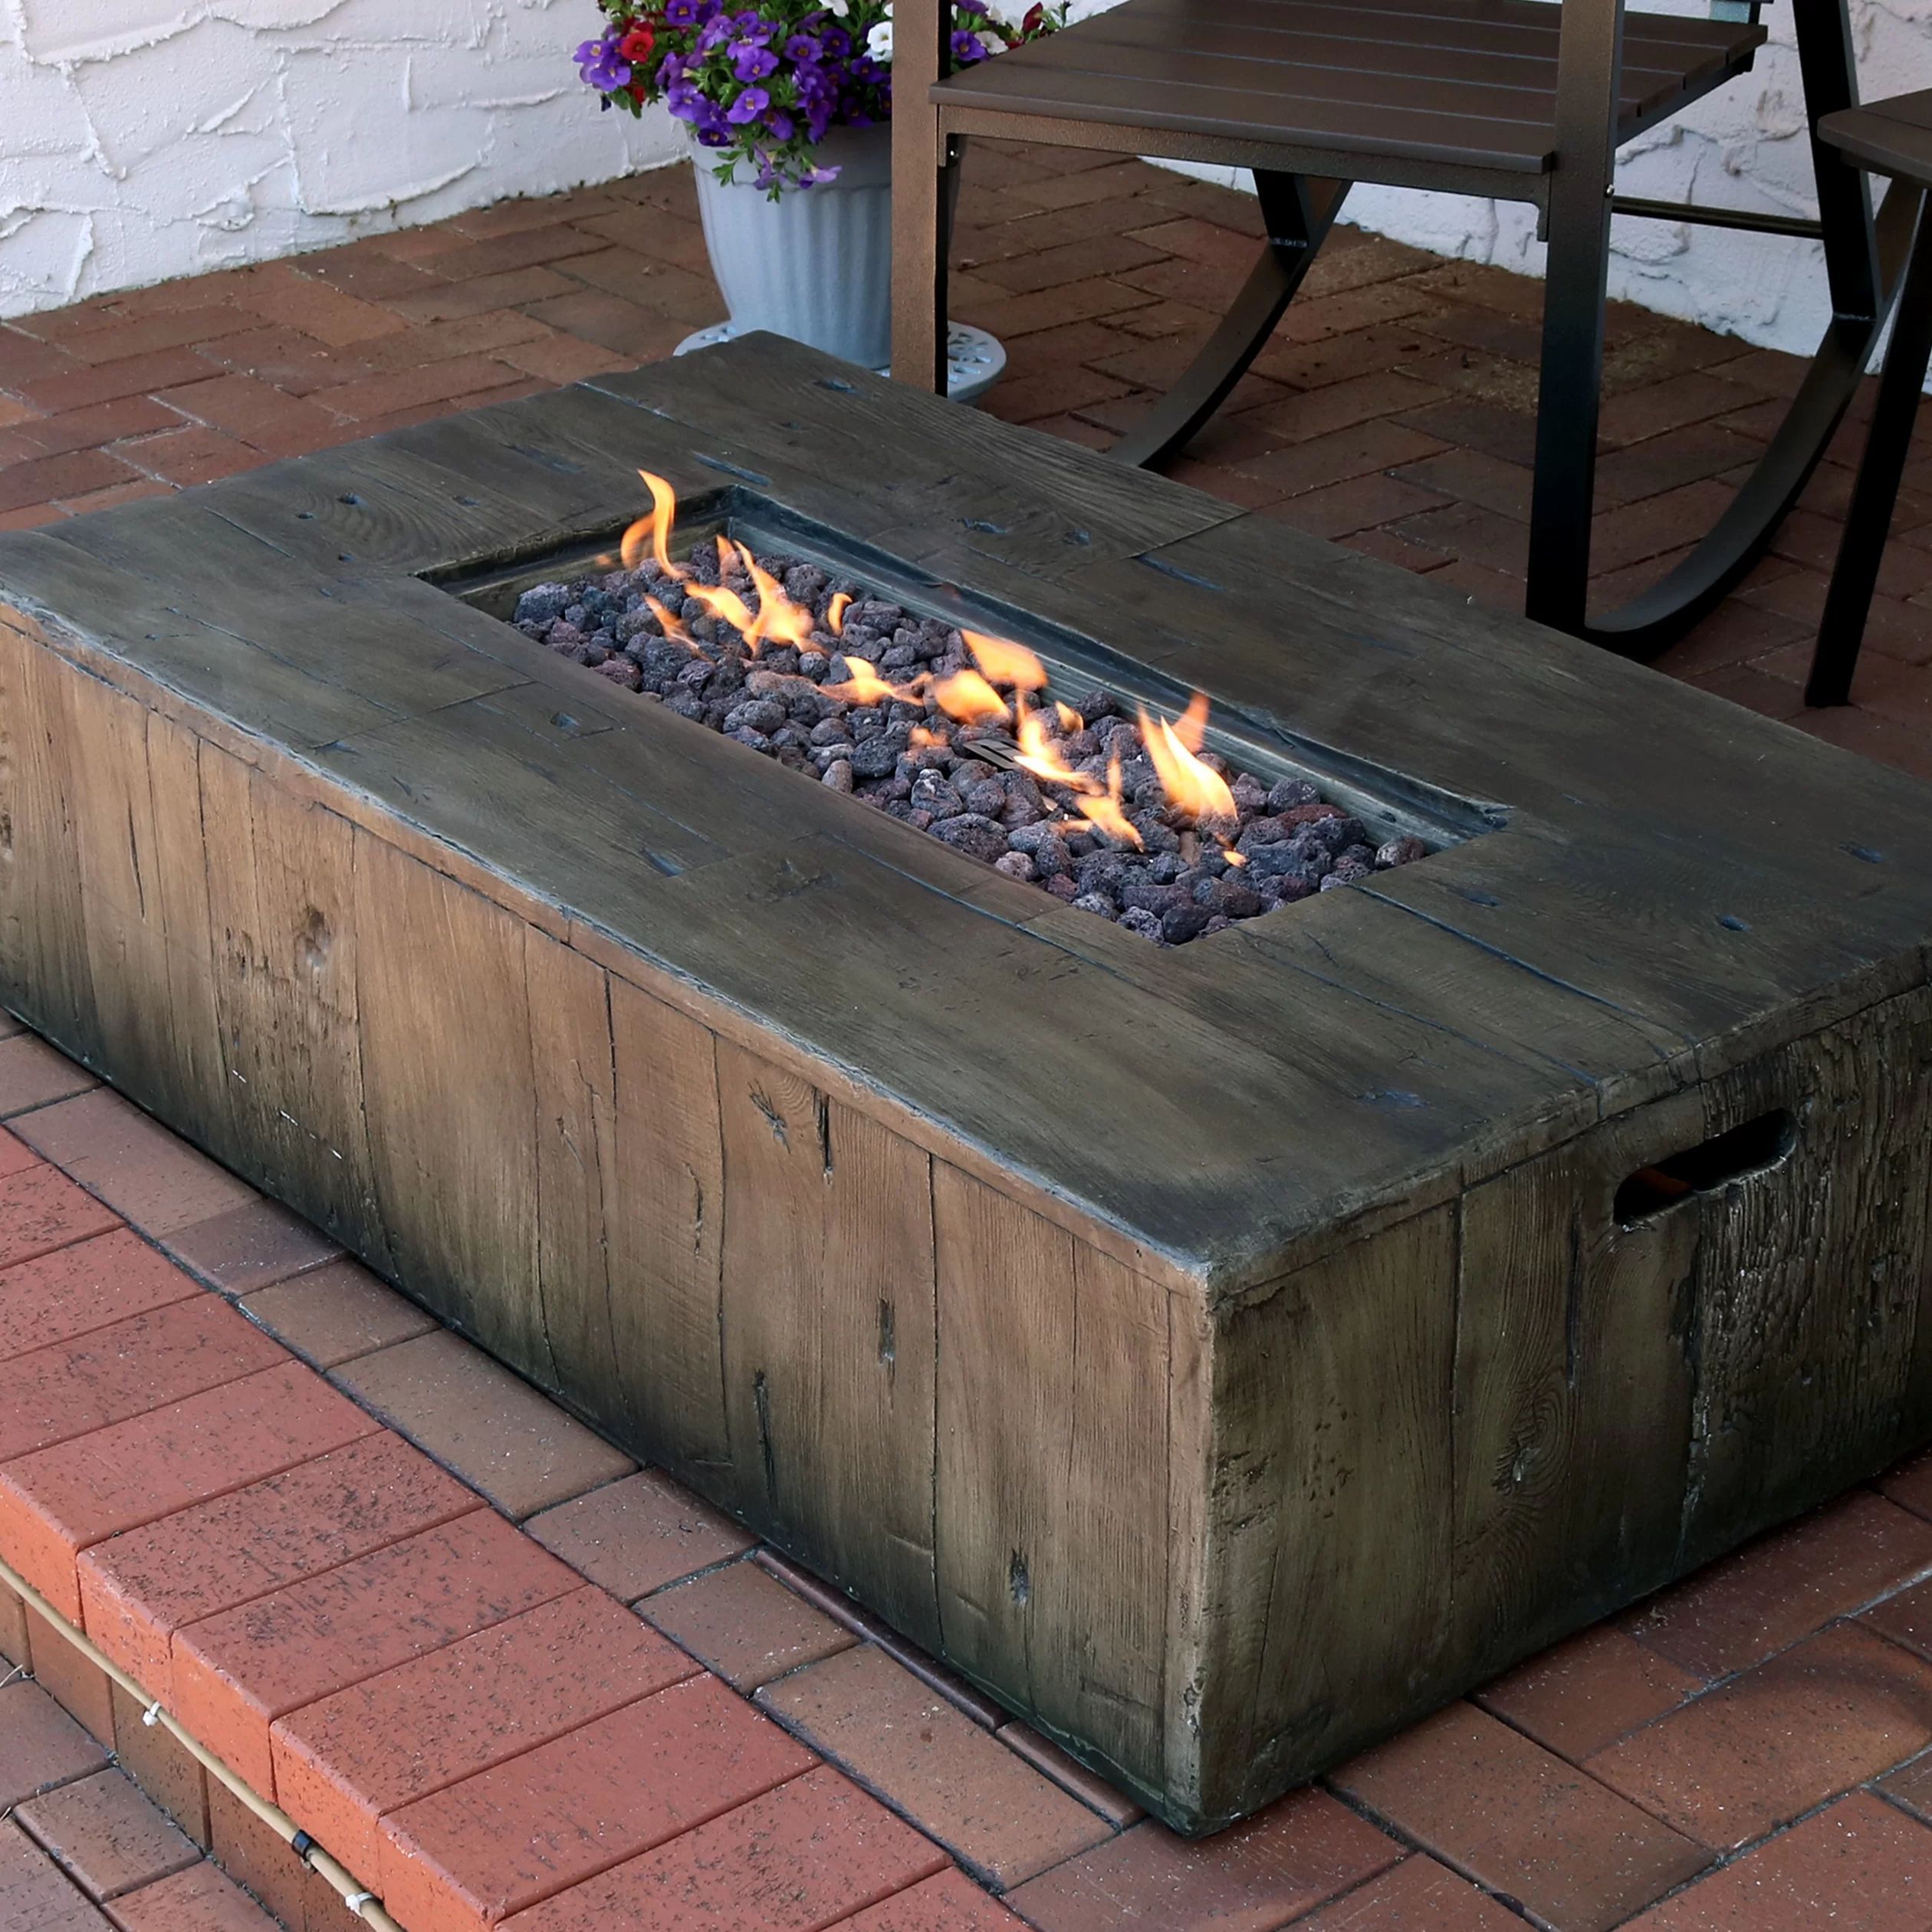 Fireplace ash Can Inspirational 10 the Best Unique Garden Ideas with Pallets to Create